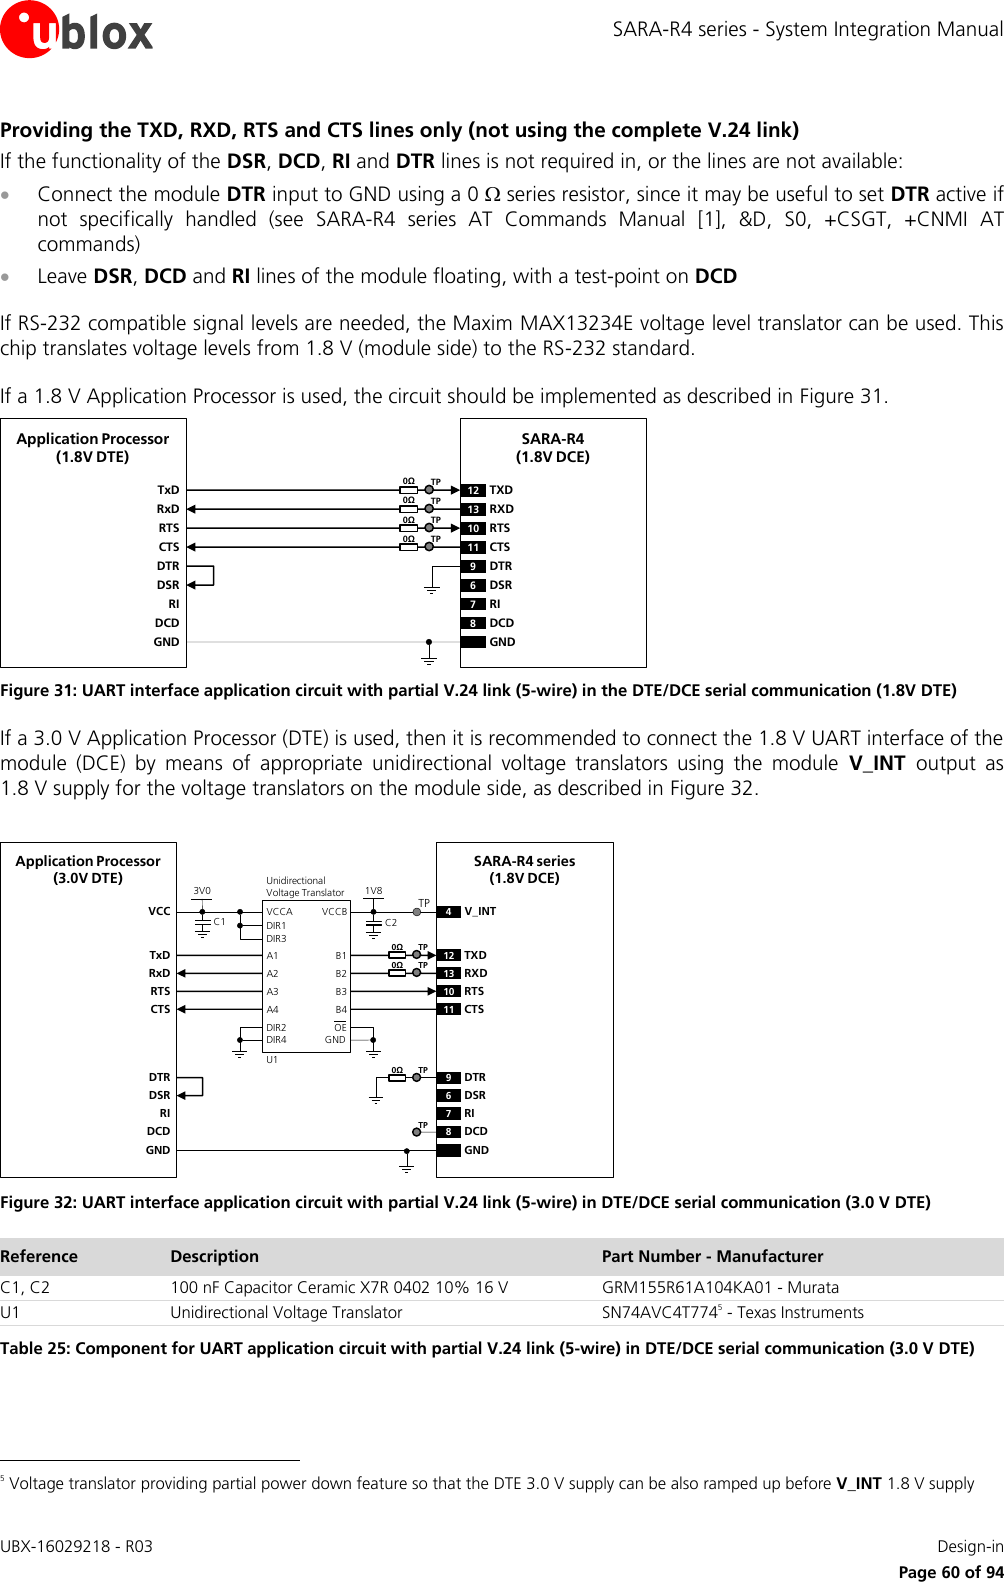 SARA-R4 series - System Integration Manual UBX-16029218 - R03    Design-in     Page 60 of 94 Providing the TXD, RXD, RTS and CTS lines only (not using the complete V.24 link) If the functionality of the DSR, DCD, RI and DTR lines is not required in, or the lines are not available:  Connect the module DTR input to GND using a 0  series resistor, since it may be useful to set DTR active if not  specifically  handled  (see  SARA-R4  series  AT  Commands  Manual [1],  &amp;D,  S0,  +CSGT,  +CNMI  AT commands)  Leave DSR, DCD and RI lines of the module floating, with a test-point on DCD  If RS-232 compatible signal levels are needed, the Maxim MAX13234E voltage level translator can be used. This chip translates voltage levels from 1.8 V (module side) to the RS-232 standard.  If a 1.8 V Application Processor is used, the circuit should be implemented as described in Figure 31.  TxDApplication Processor(1.8V DTE)RxDRTSCTSDTRDSRRIDCDGNDSARA-R4(1.8V DCE)12 TXD9DTR13 RXD10 RTS11 CTS6DSR7RI8DCDGND0ΩTP0ΩTP0ΩTP0ΩTP Figure 31: UART interface application circuit with partial V.24 link (5-wire) in the DTE/DCE serial communication (1.8V DTE) If a 3.0 V Application Processor (DTE) is used, then it is recommended to connect the 1.8 V UART interface of the module  (DCE)  by  means  of  appropriate  unidirectional  voltage  translators  using  the  module  V_INT  output  as 1.8 V supply for the voltage translators on the module side, as described in Figure 32.  4V_INTTxDApplication Processor(3.0V DTE)RxDRTSCTSDTRDSRRIDCDGNDSARA-R4 series (1.8V DCE)12 TXD9DTR13 RXD10 RTS11 CTS6DSR7RI8DCDGND1V8B1 A1GNDU1B3A3VCCBVCCAUnidirectionalVoltage TranslatorC1 C23V0DIR3DIR2 OEDIR1VCCB2 A2B4A4DIR4TP0ΩTP0ΩTP0ΩTPTP Figure 32: UART interface application circuit with partial V.24 link (5-wire) in DTE/DCE serial communication (3.0 V DTE) Reference Description Part Number - Manufacturer C1, C2 100 nF Capacitor Ceramic X7R 0402 10% 16 V GRM155R61A104KA01 - Murata U1 Unidirectional Voltage Translator SN74AVC4T7745 - Texas Instruments Table 25: Component for UART application circuit with partial V.24 link (5-wire) in DTE/DCE serial communication (3.0 V DTE)                                                        5 Voltage translator providing partial power down feature so that the DTE 3.0 V supply can be also ramped up before V_INT 1.8 V supply 